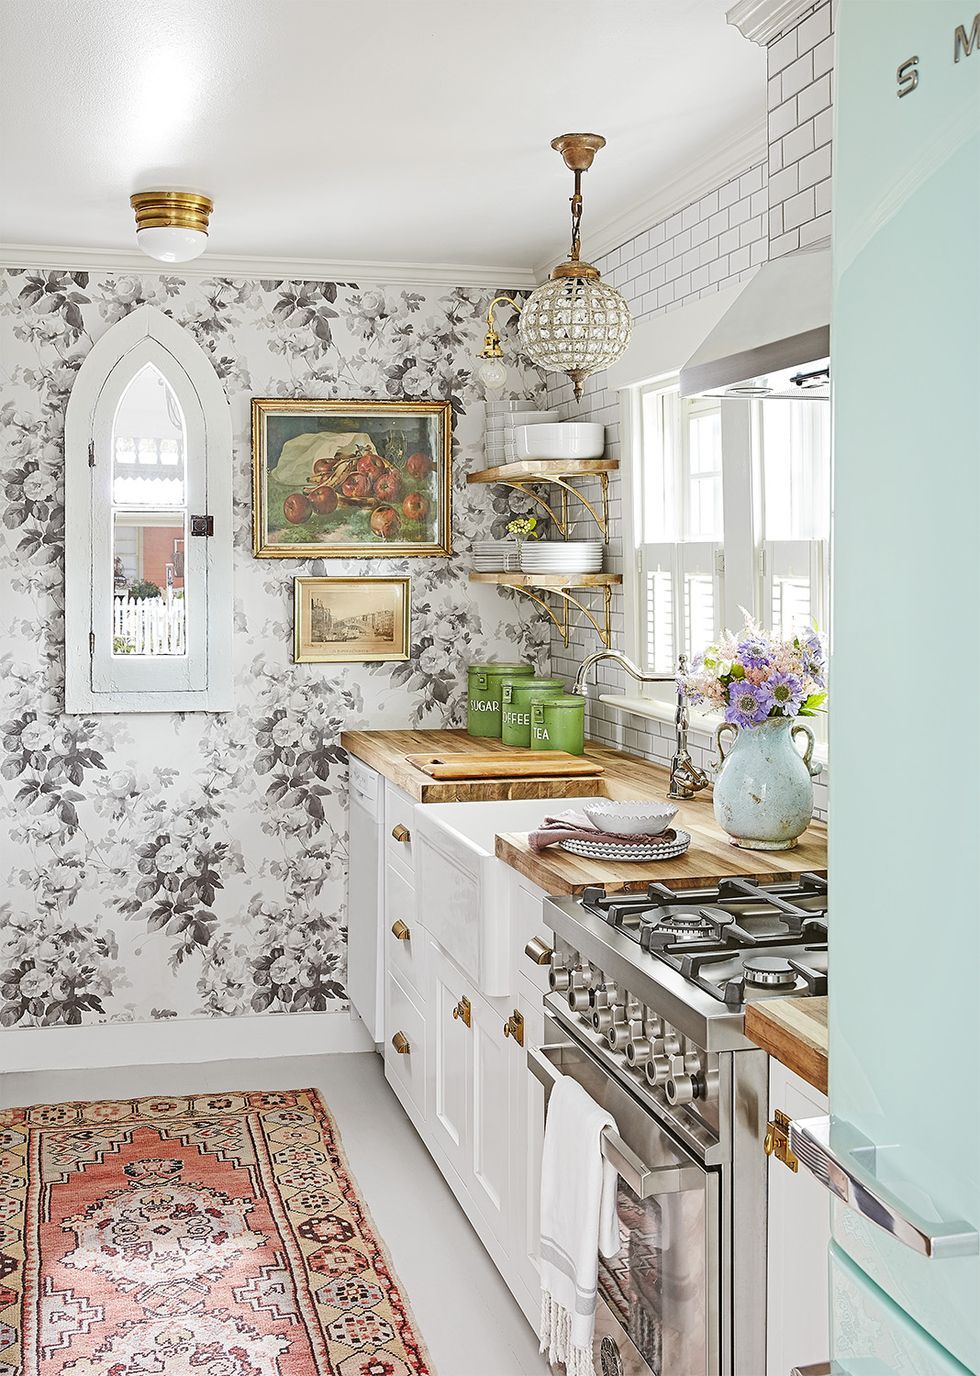 15 Kitchen Wallpaper Design Ideas for Every Style